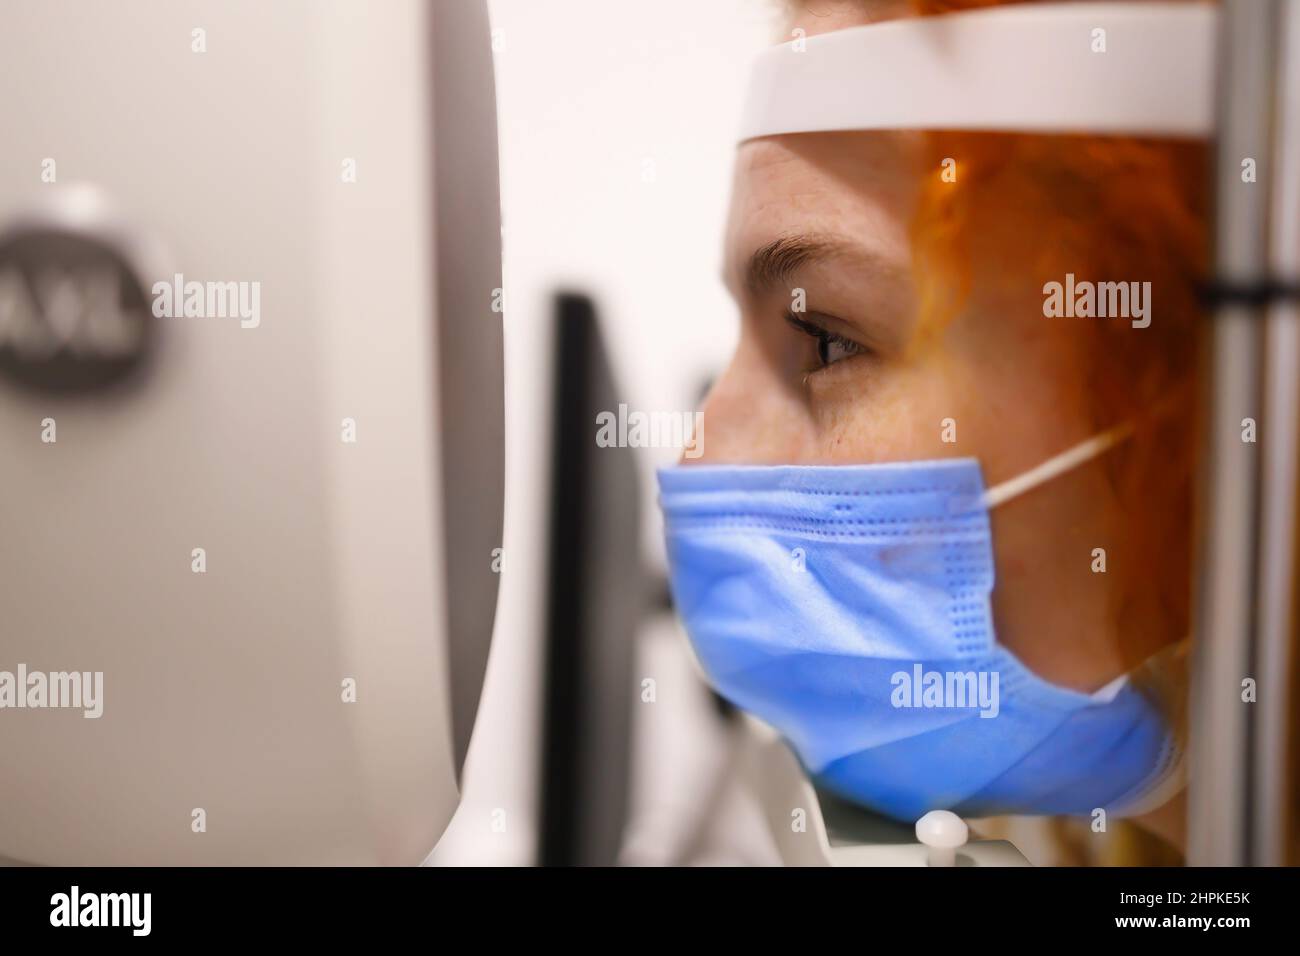 A woman examining her eyes at the eye clinic Stock Photo